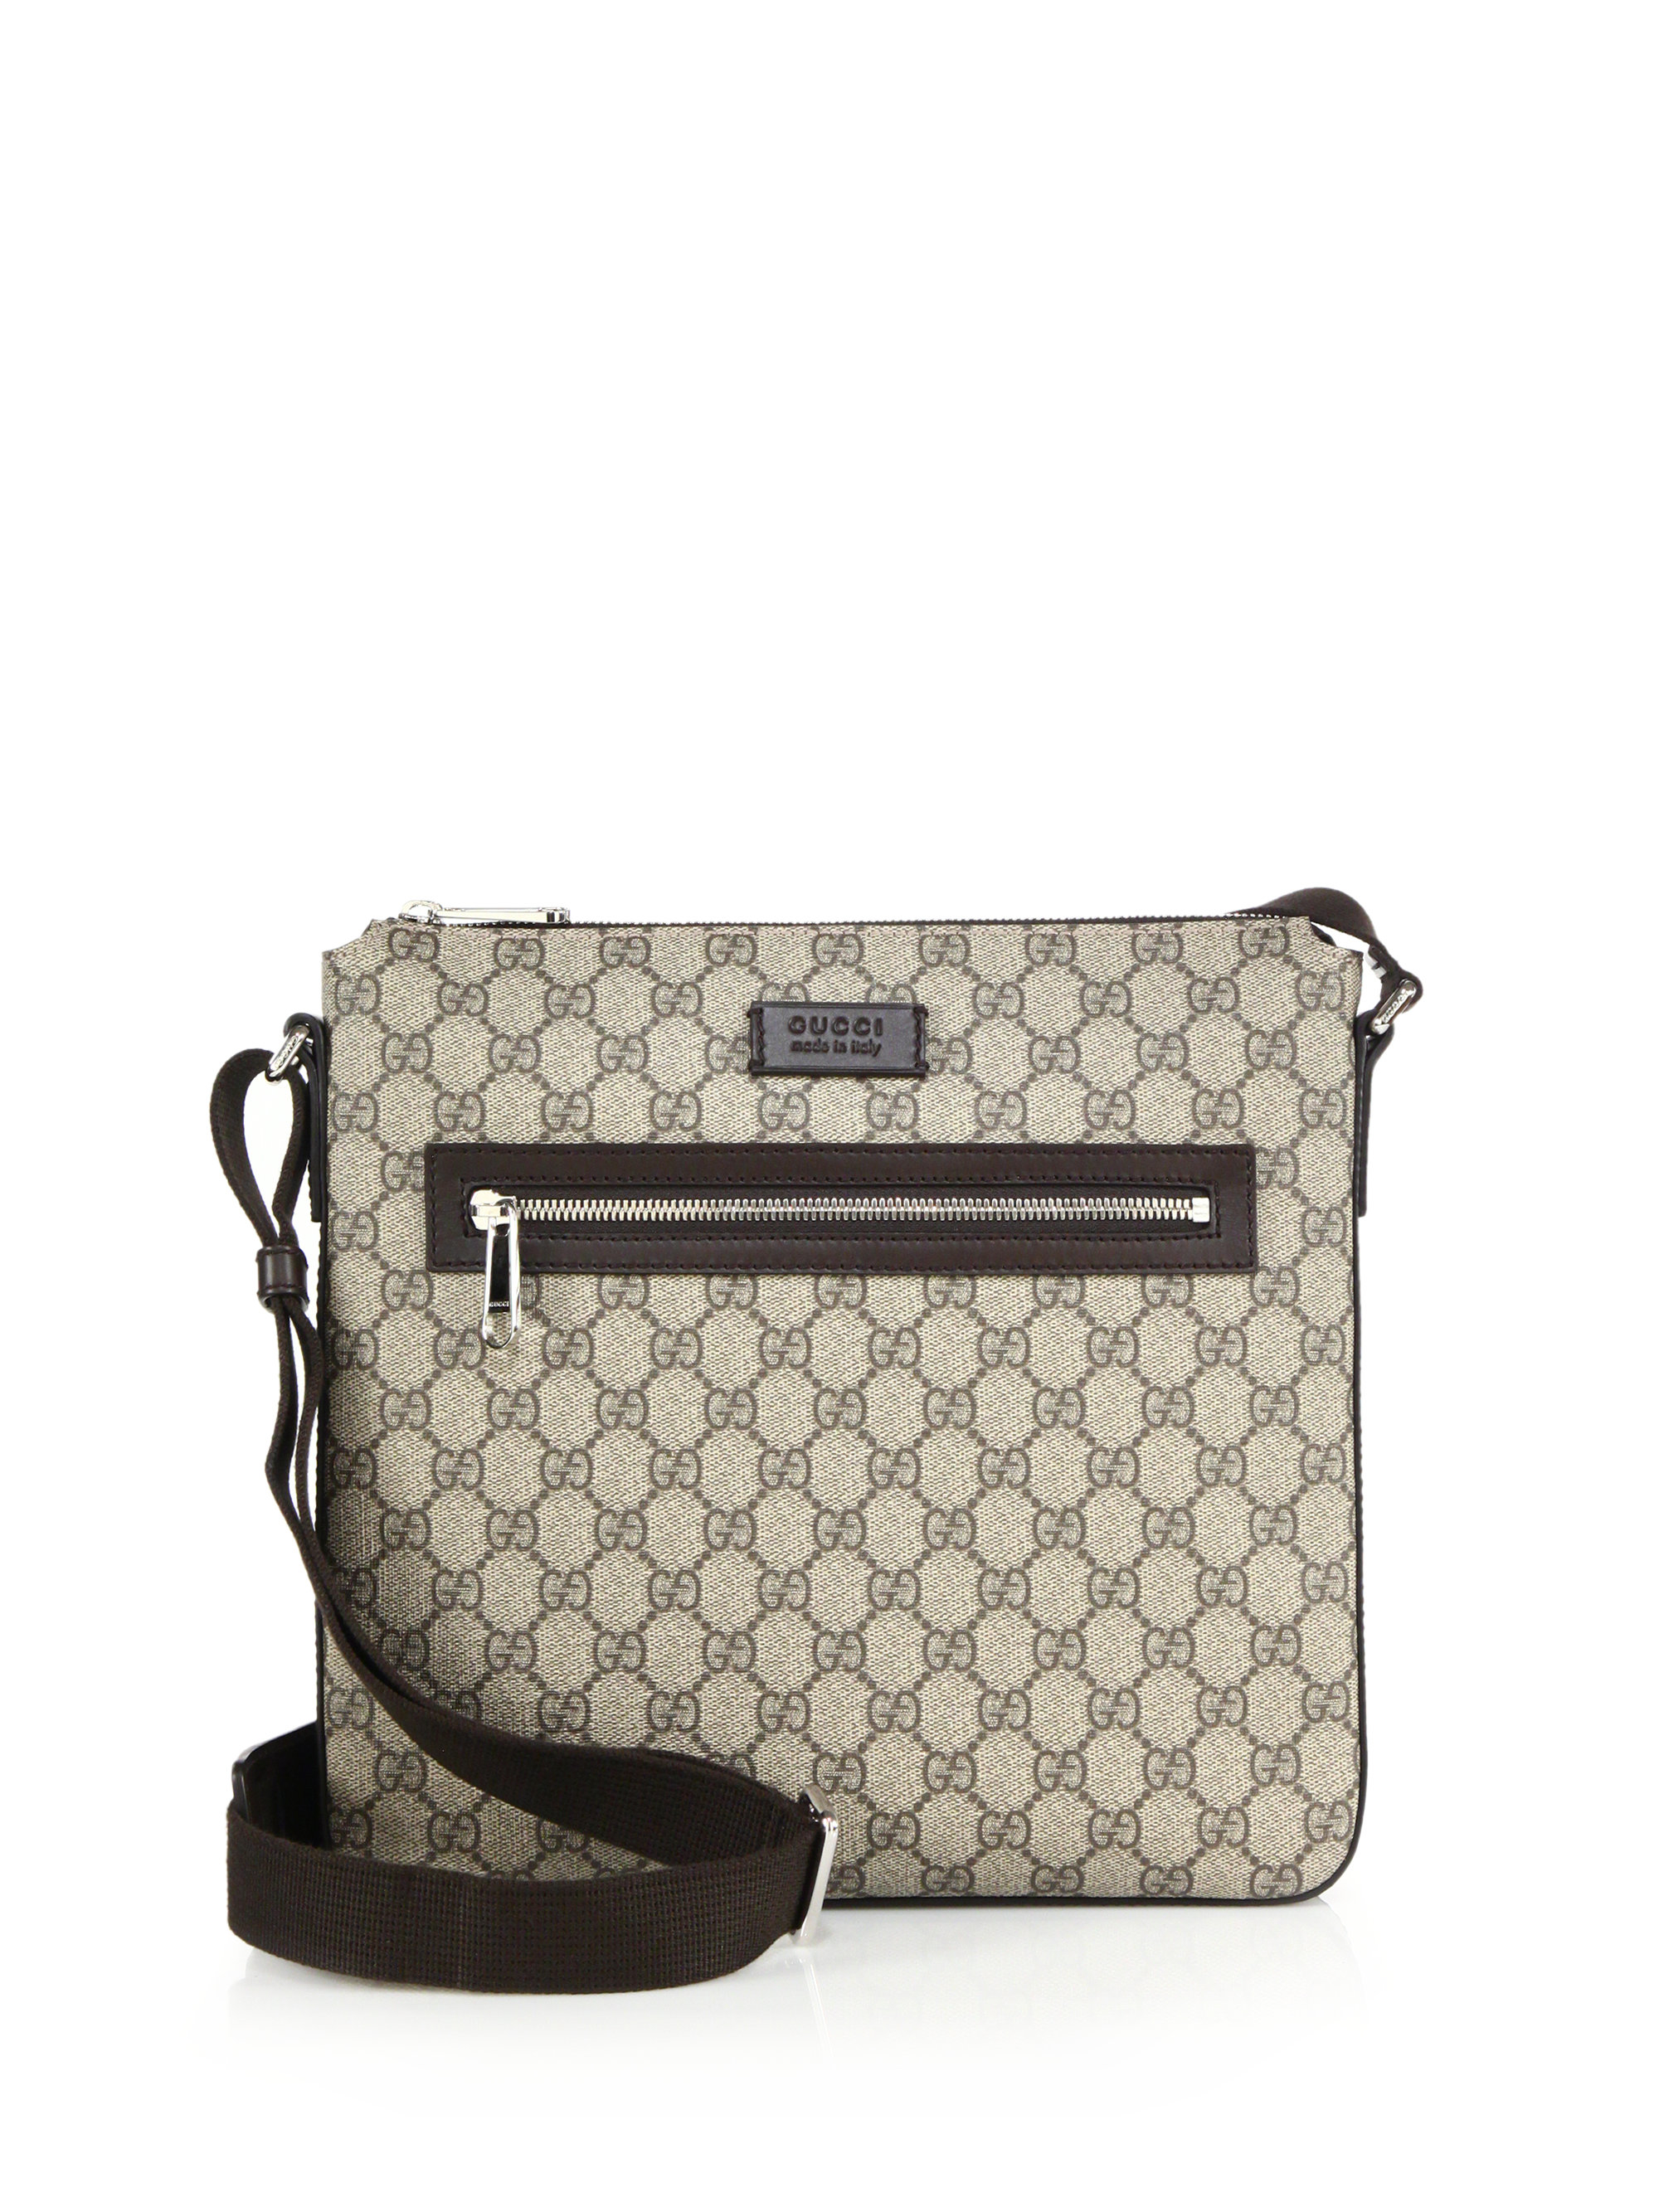 Gucci Gg Supreme Canvas Flat Messenger Bag in Brown for Men | Lyst